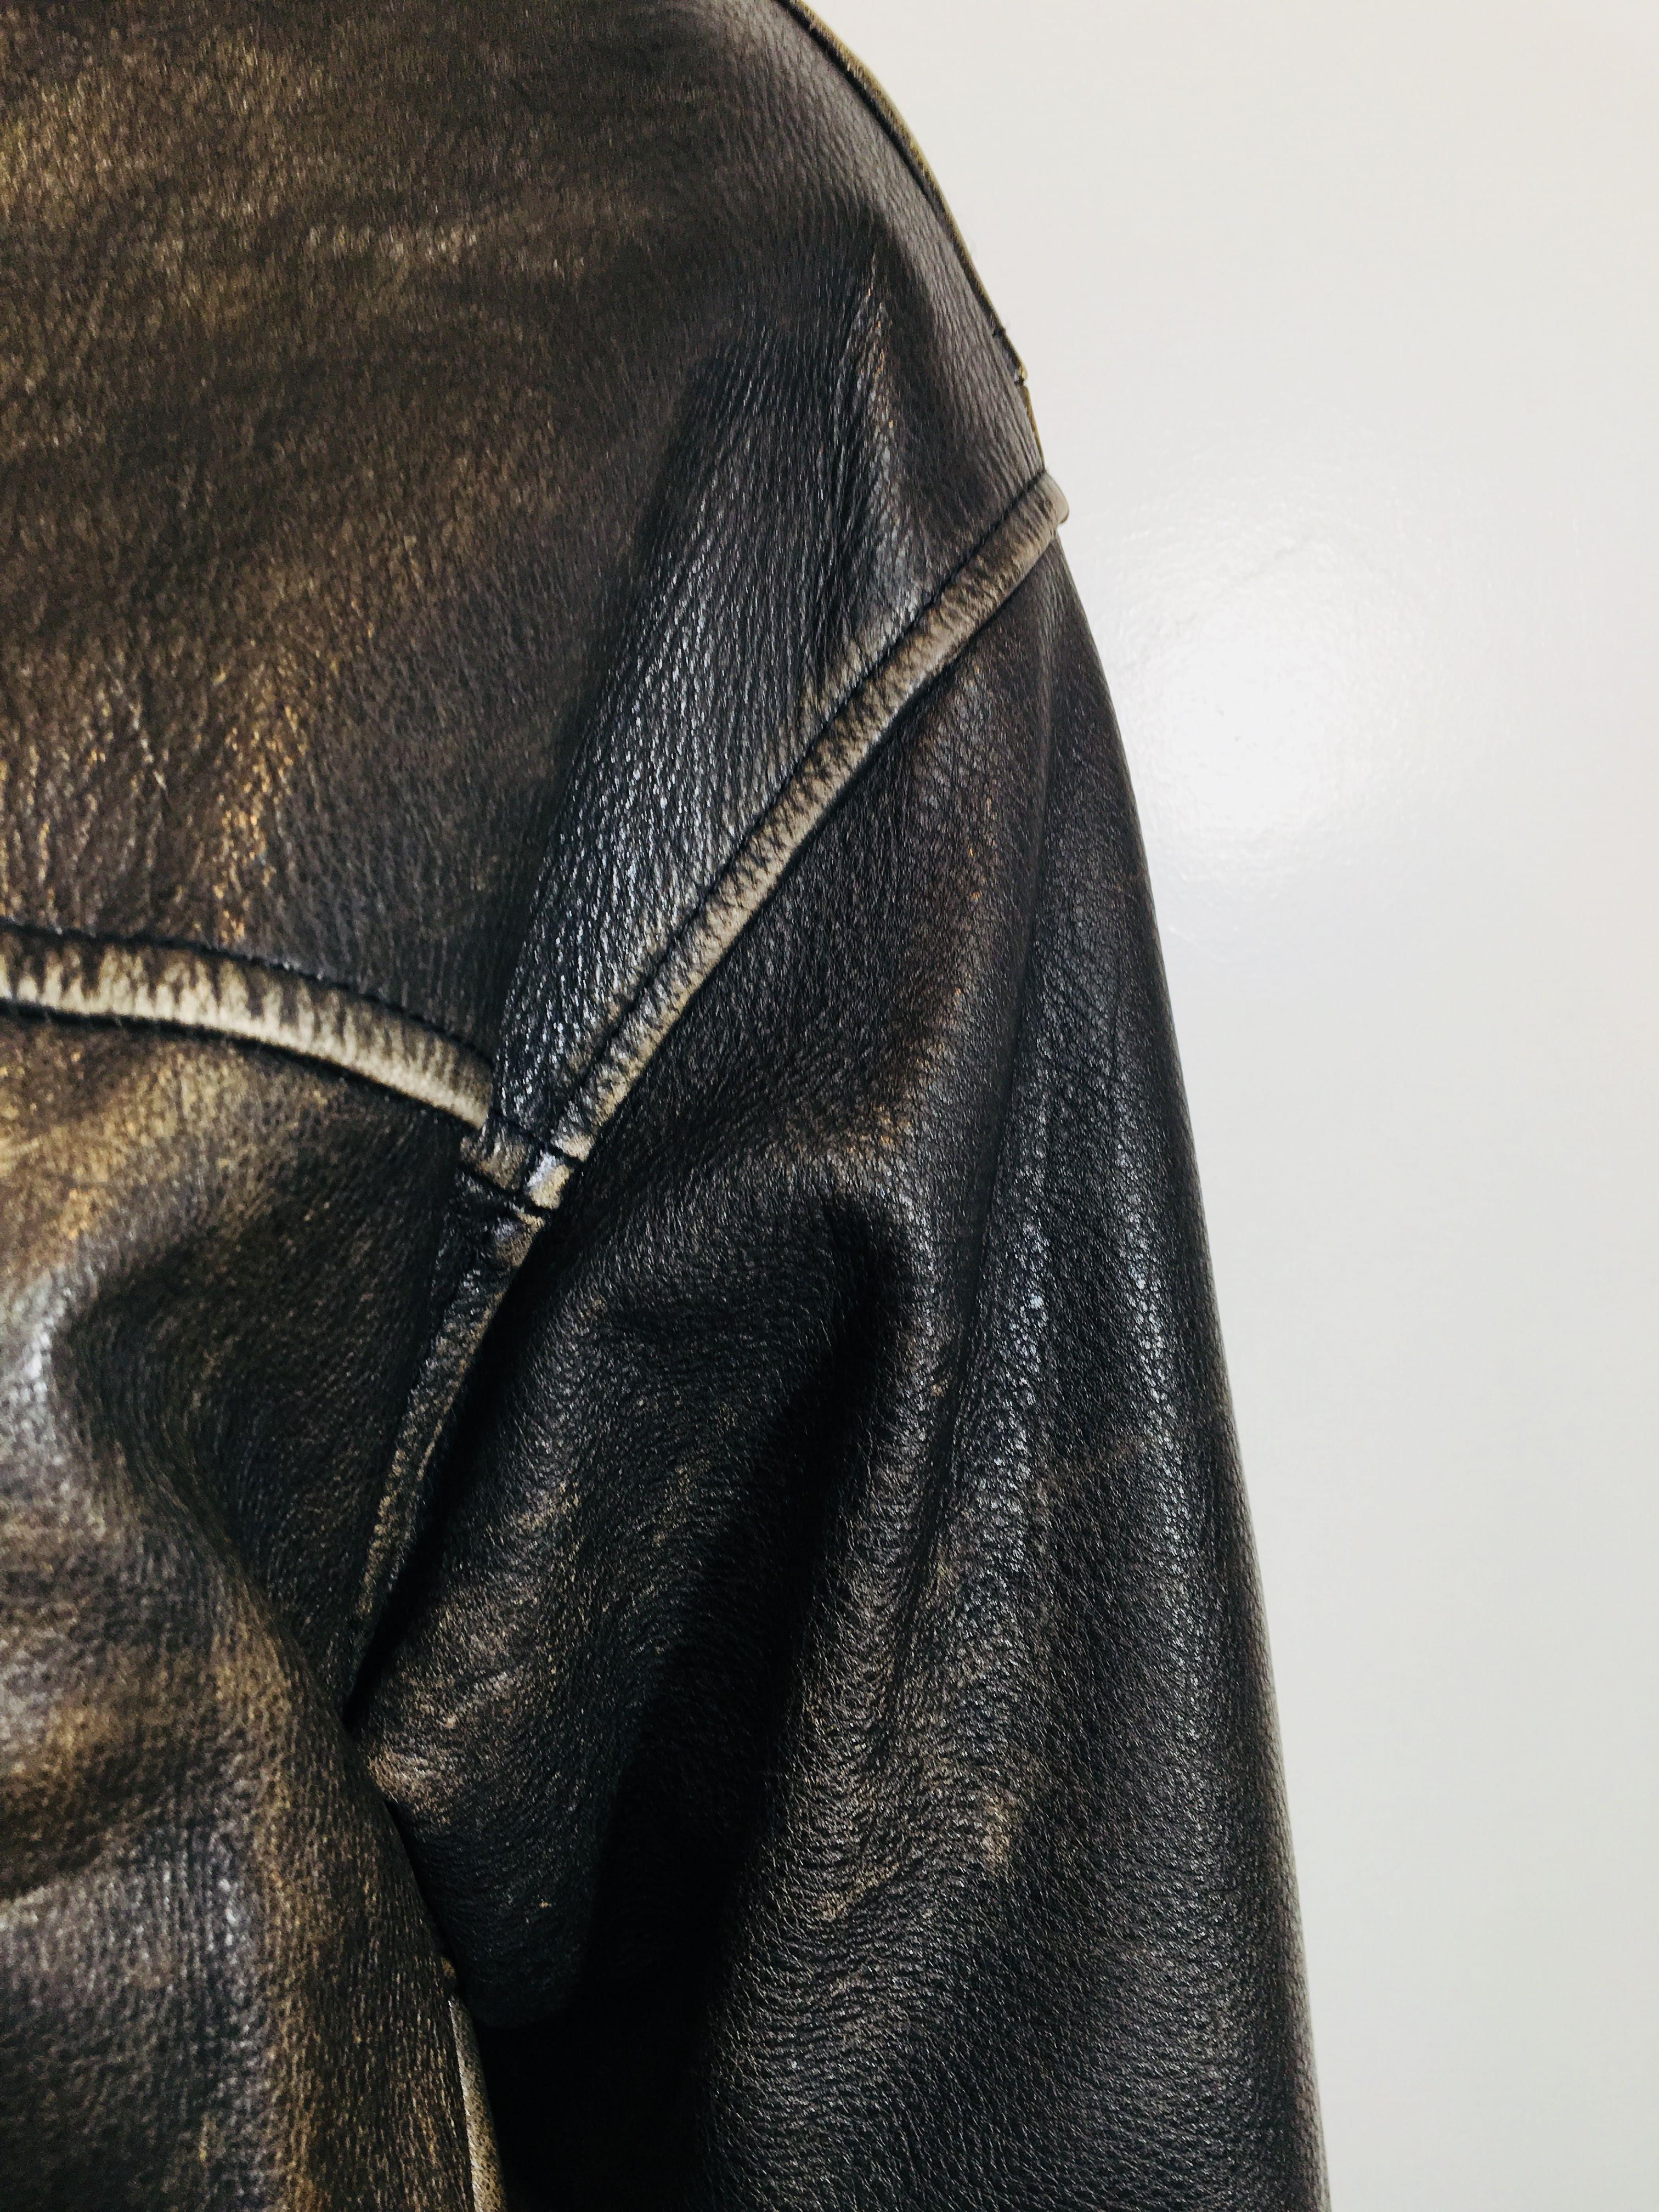 faded leather jacket